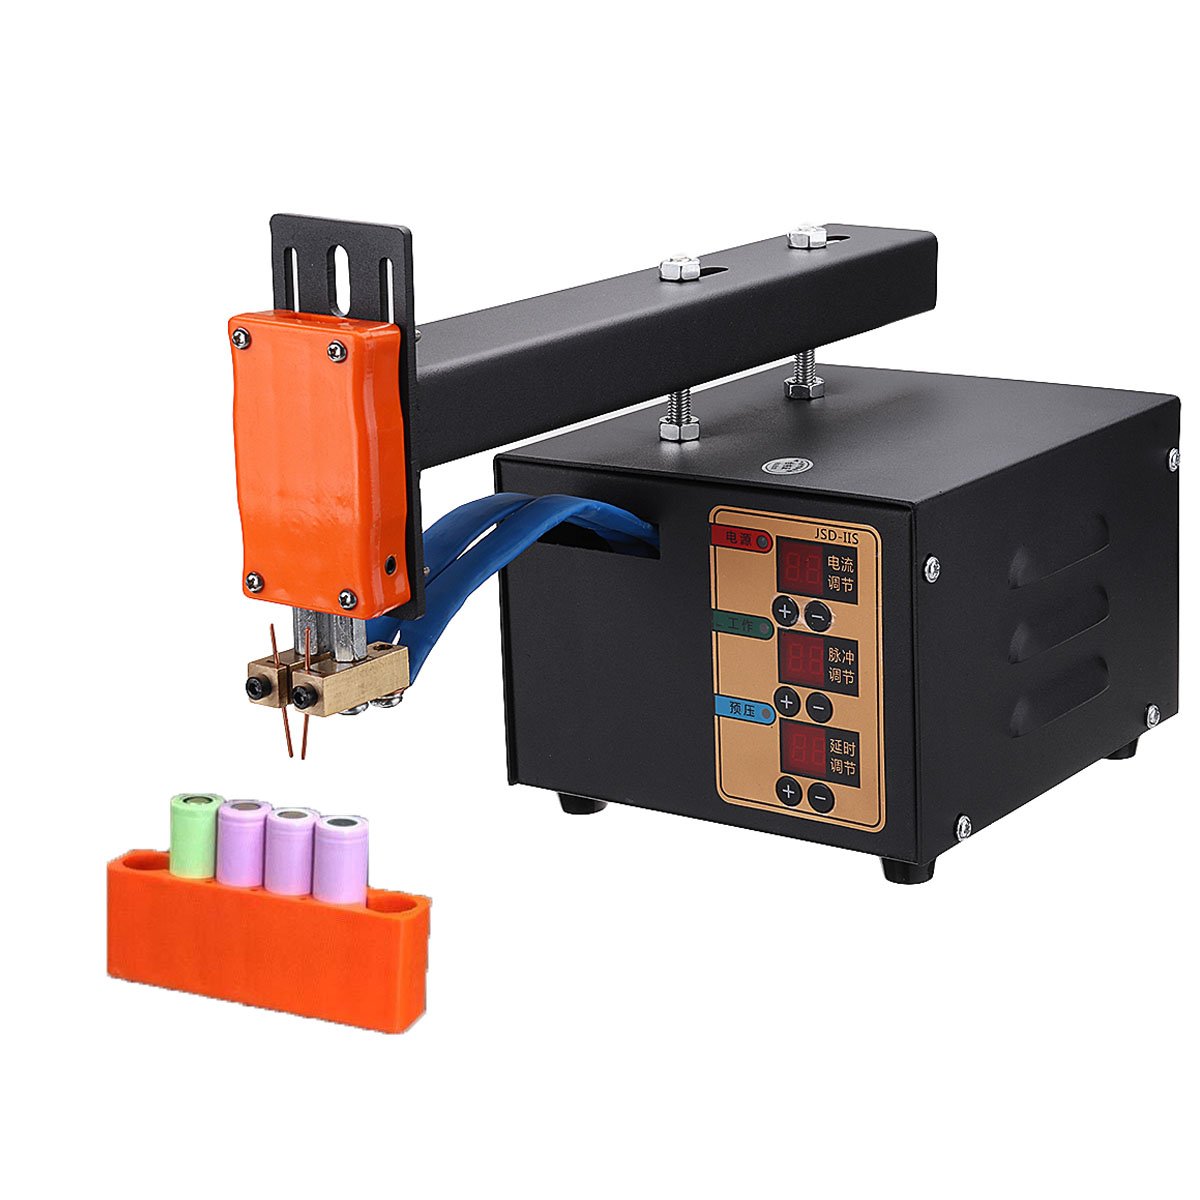 220V 3KW Battery Spot Welding Machine Extended Arm Welding Machine with Pulse & Current Display 1